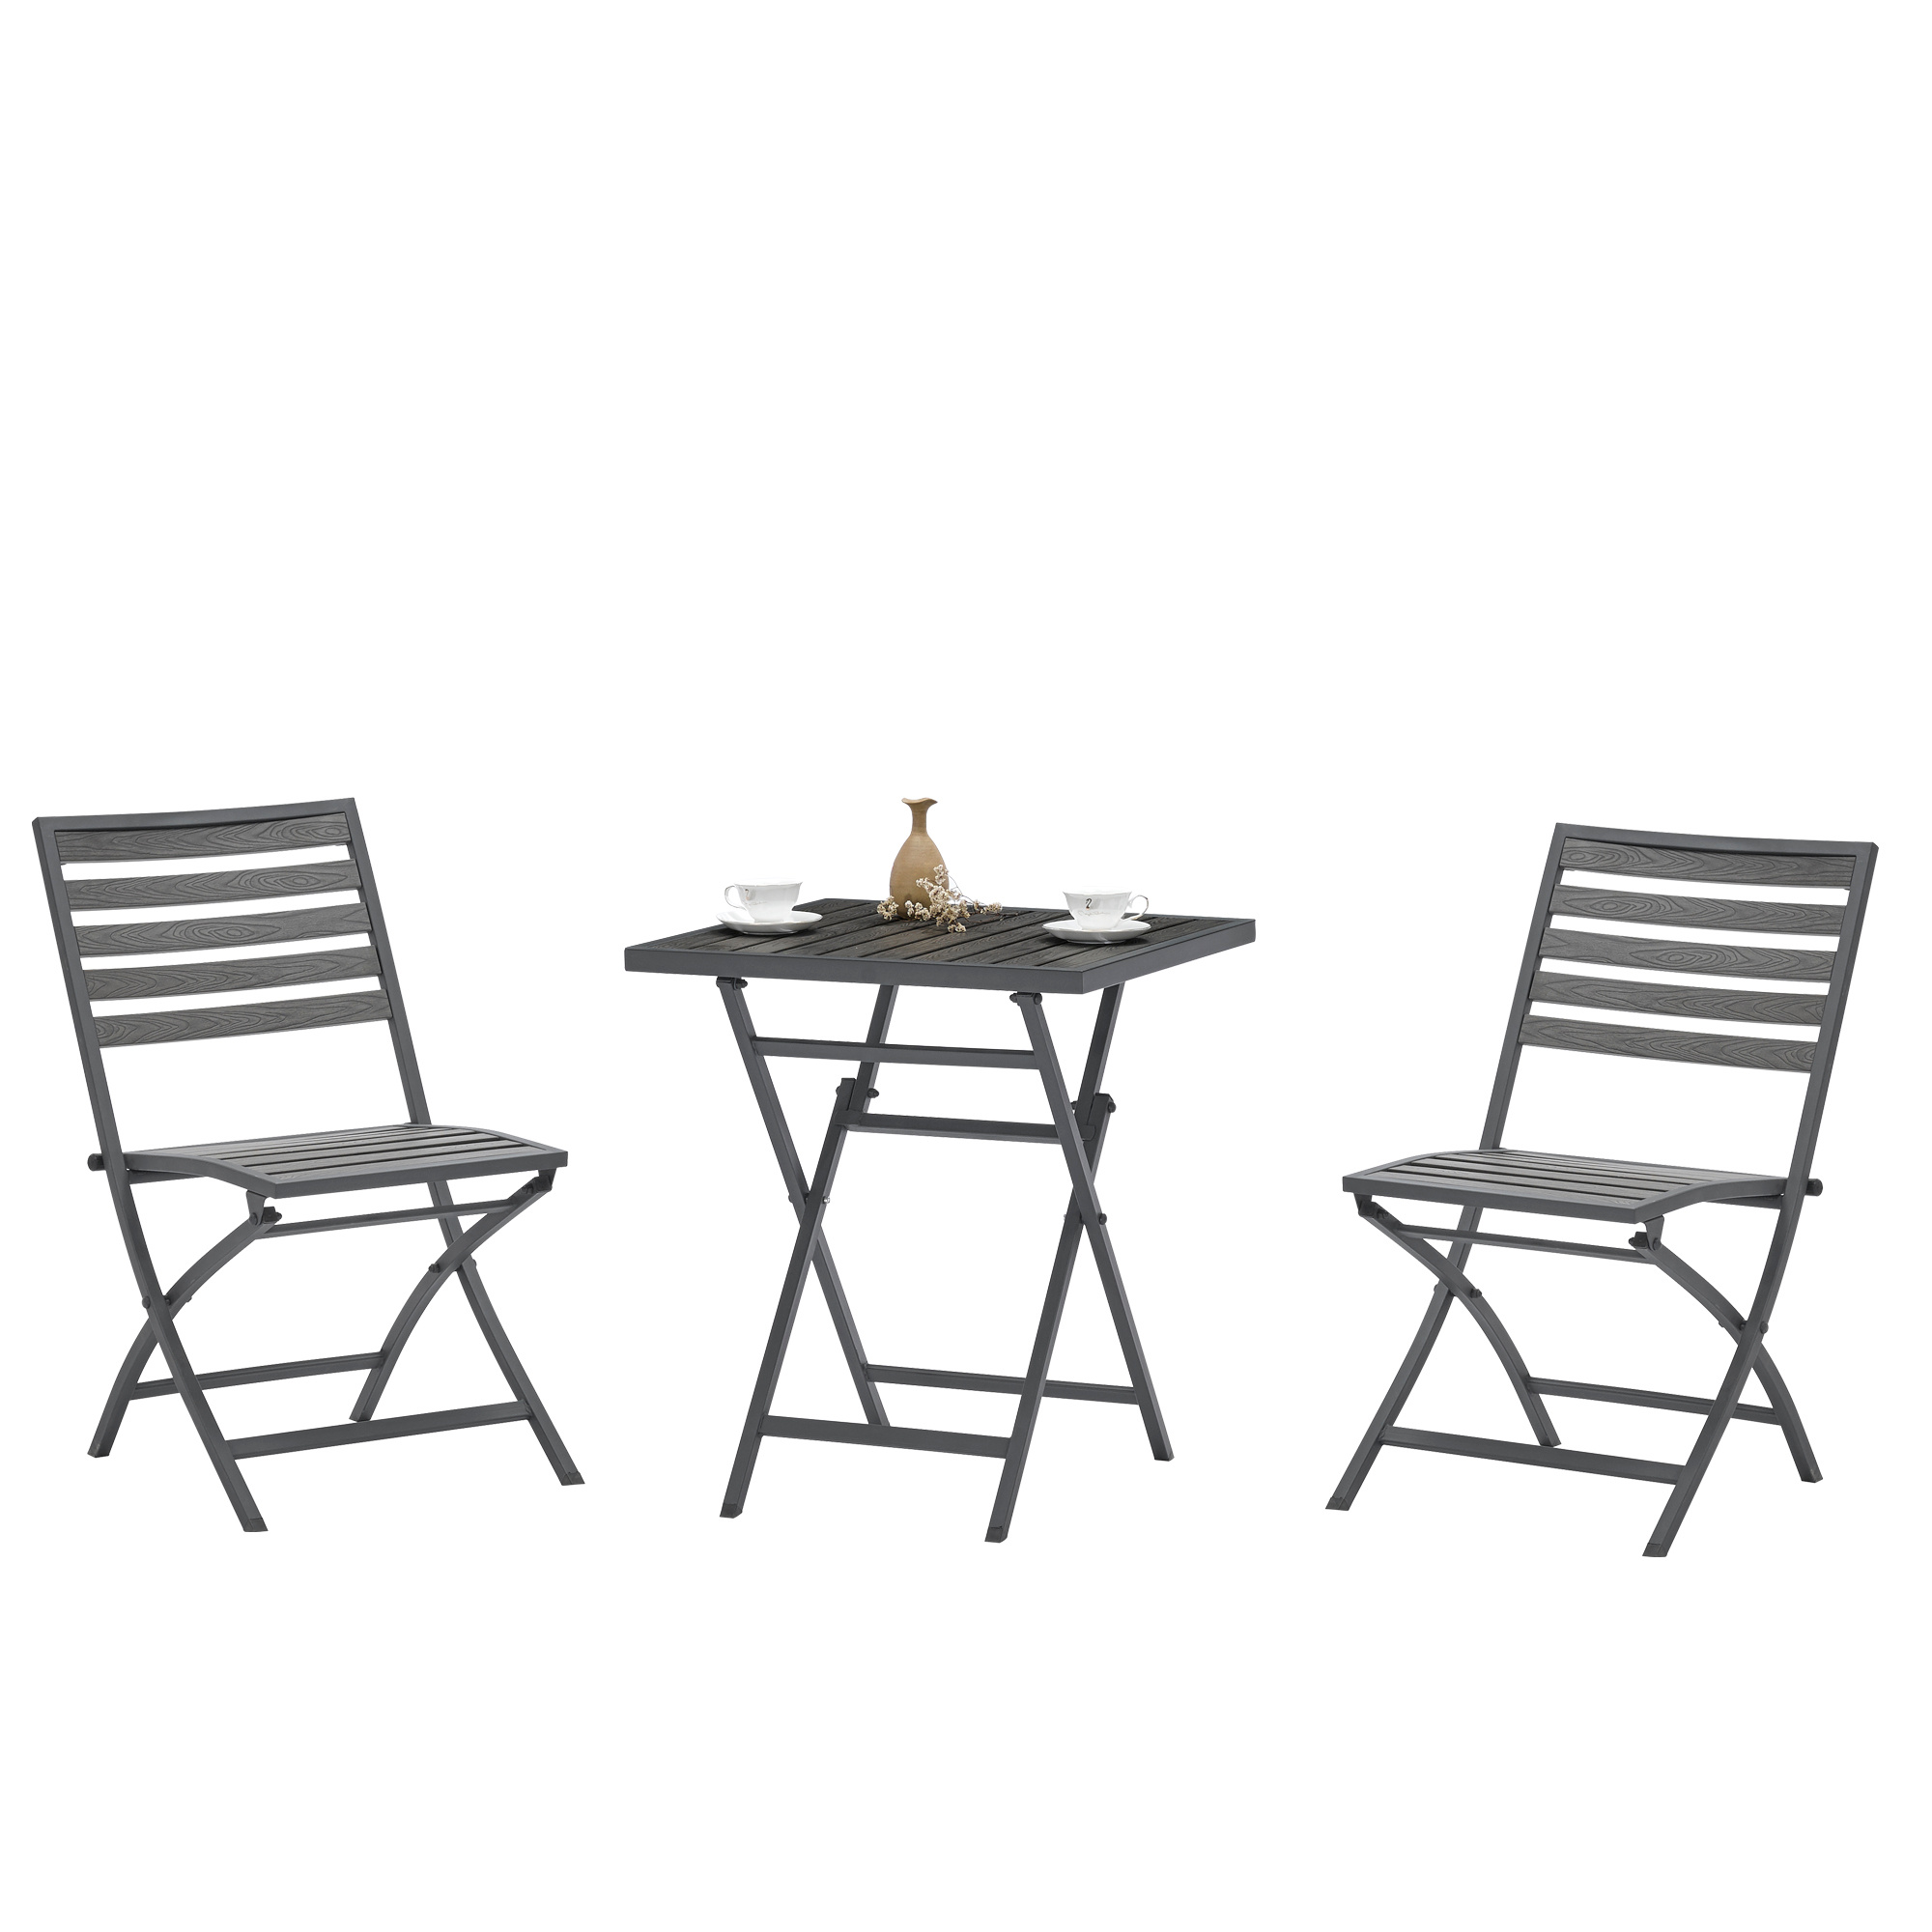 Modern Rattan Coffee Chair Table Set 3 PCS, Aukfa Modern Rocking Bistro Set Rattan Chair, Outdoor Furniture Rattan Chair, Garden Set（Two Chair + One Table） - image 1 of 10